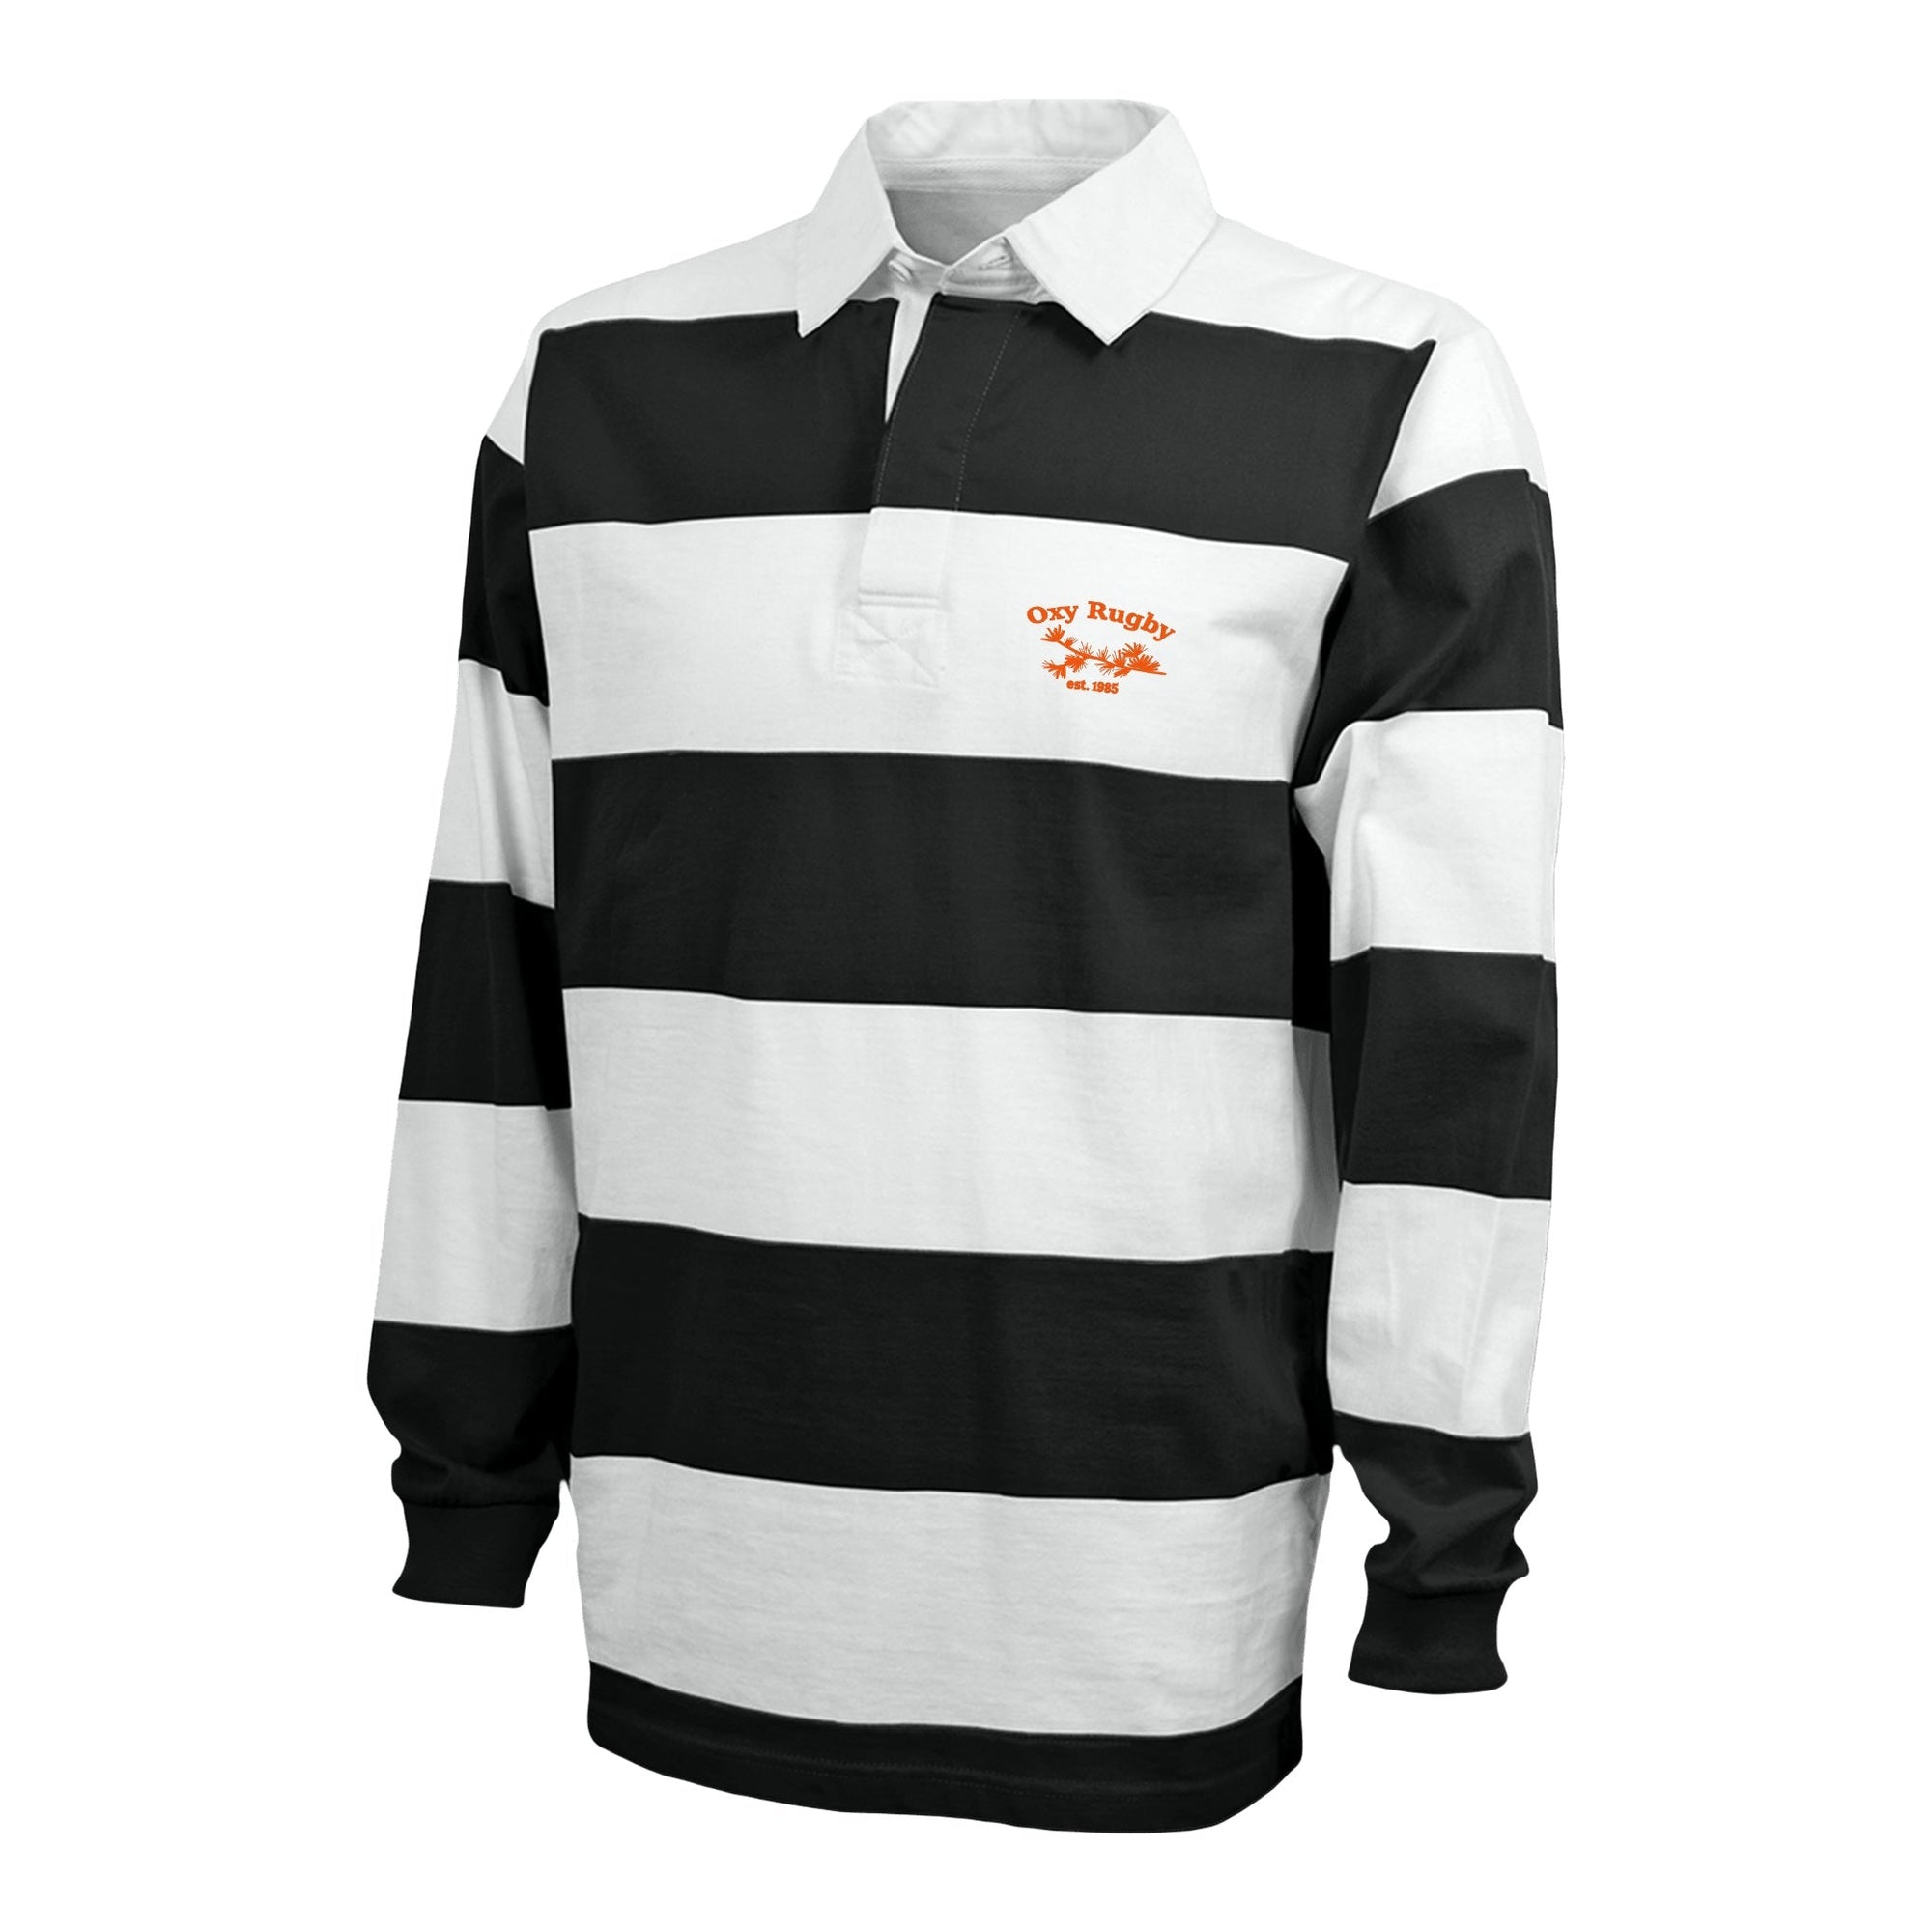 Rugby Imports Oxy Rugby Cotton Social Jersey